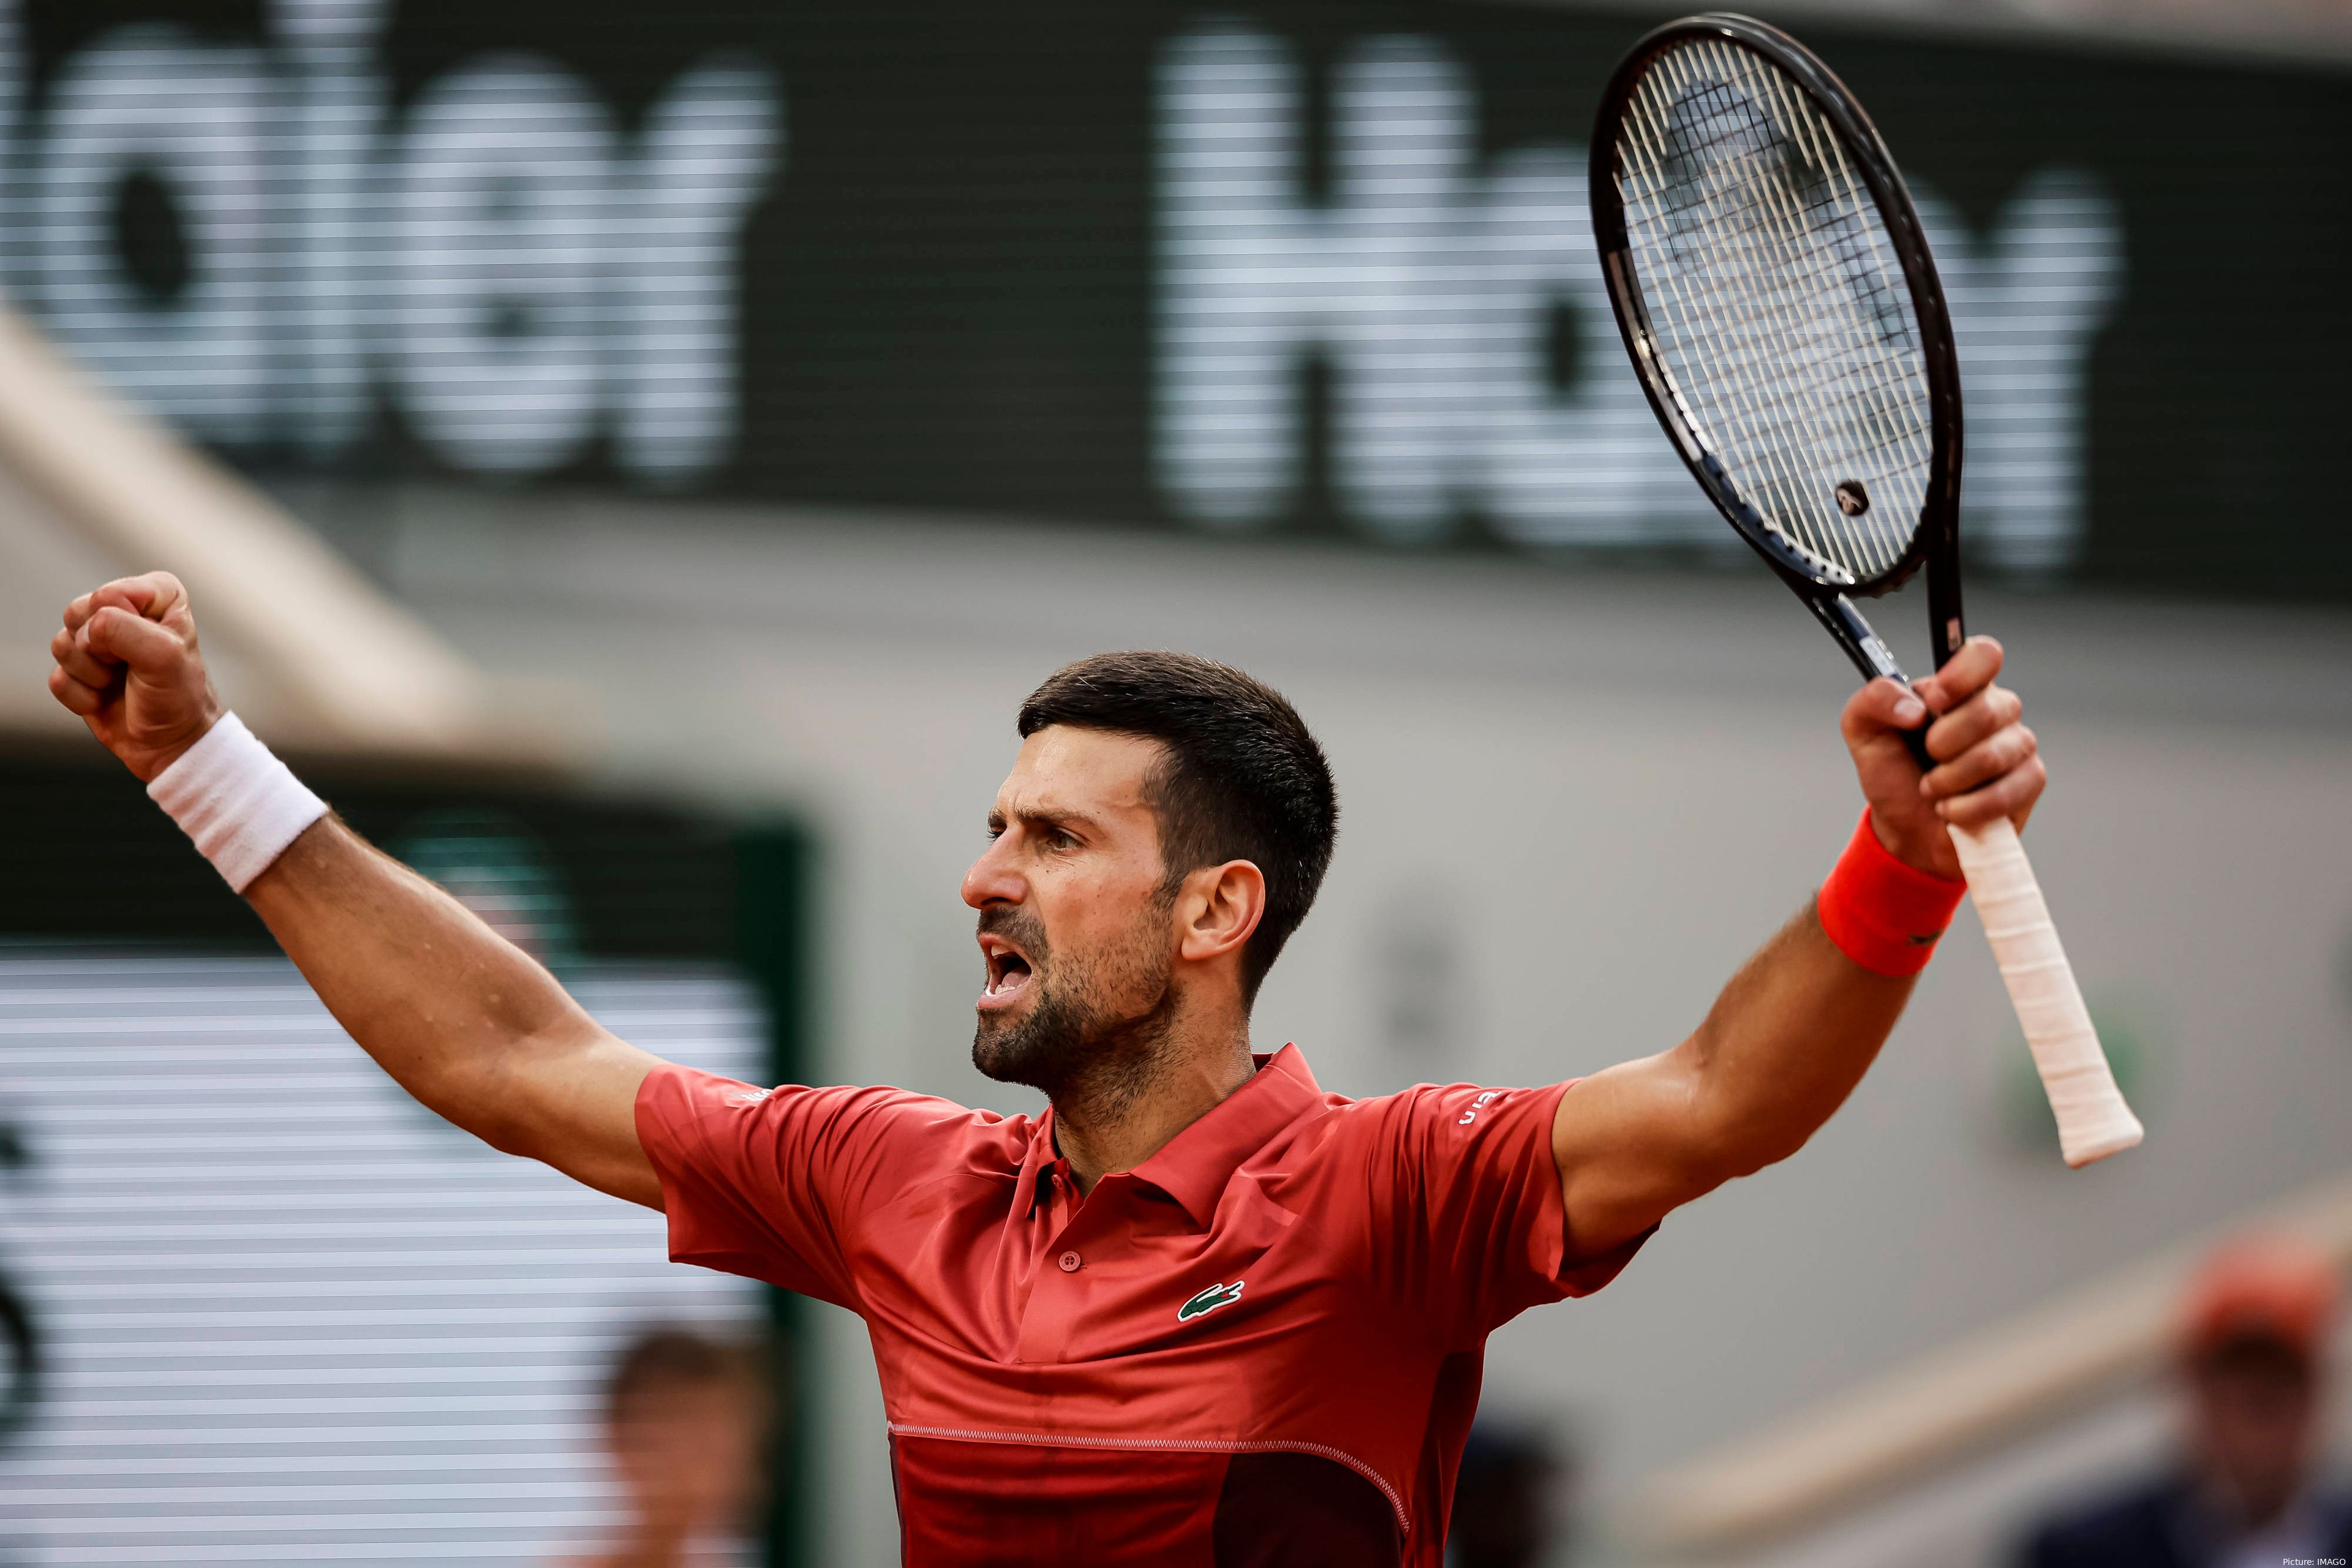 Novak Djokovic won against Francisco Cerundolo but found himself withdrawing due to a meniscus tear.